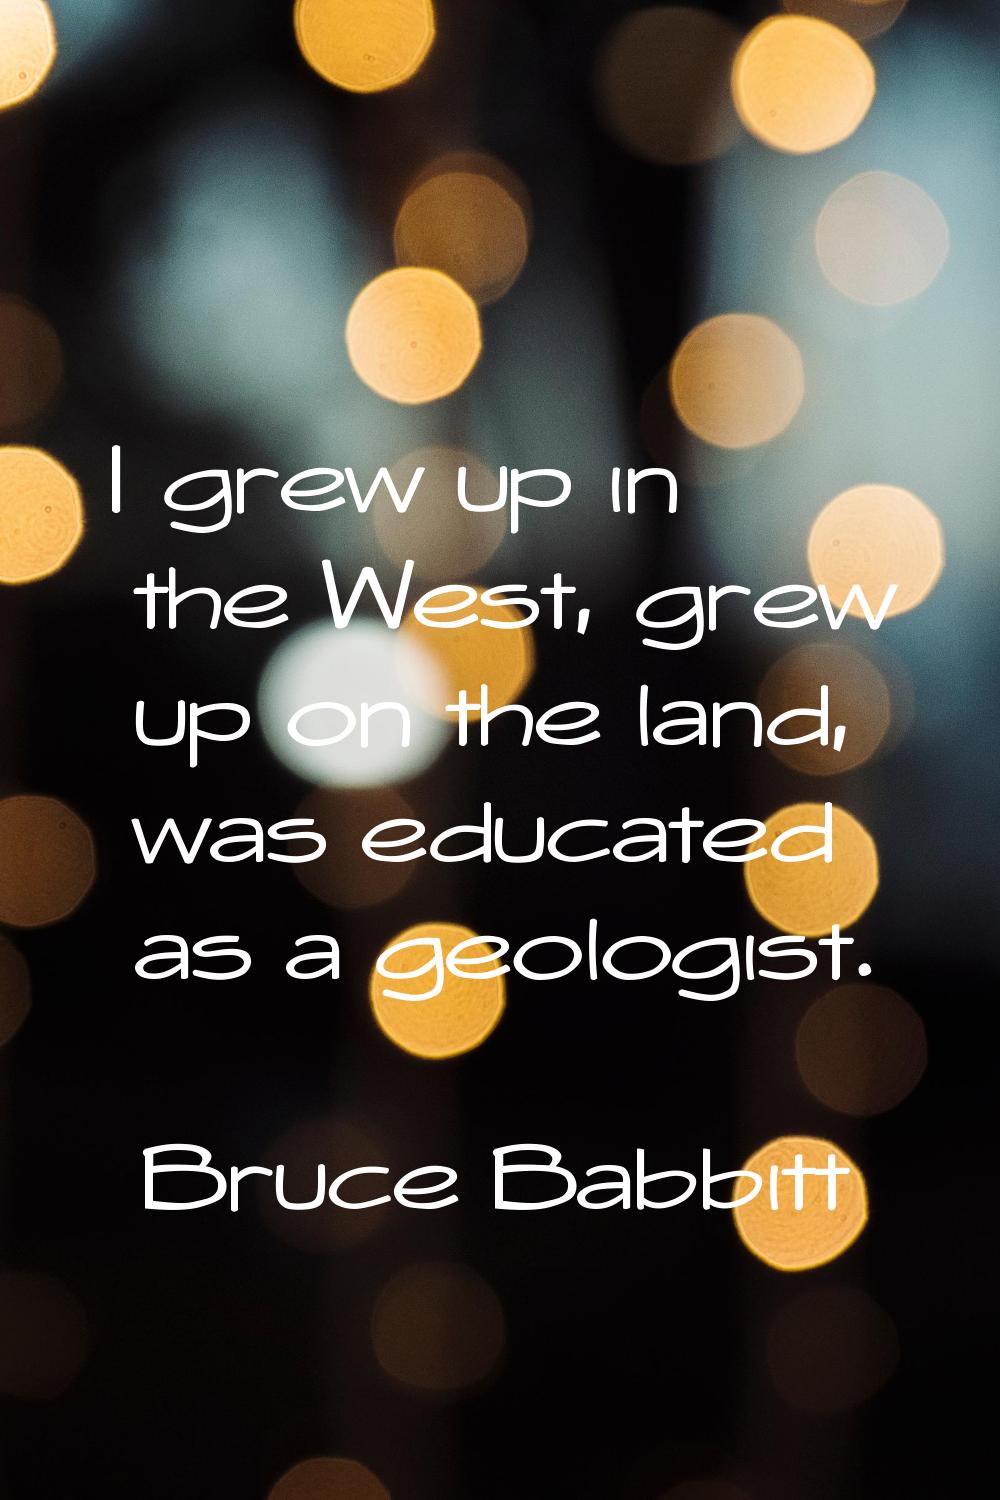 I grew up in the West, grew up on the land, was educated as a geologist.